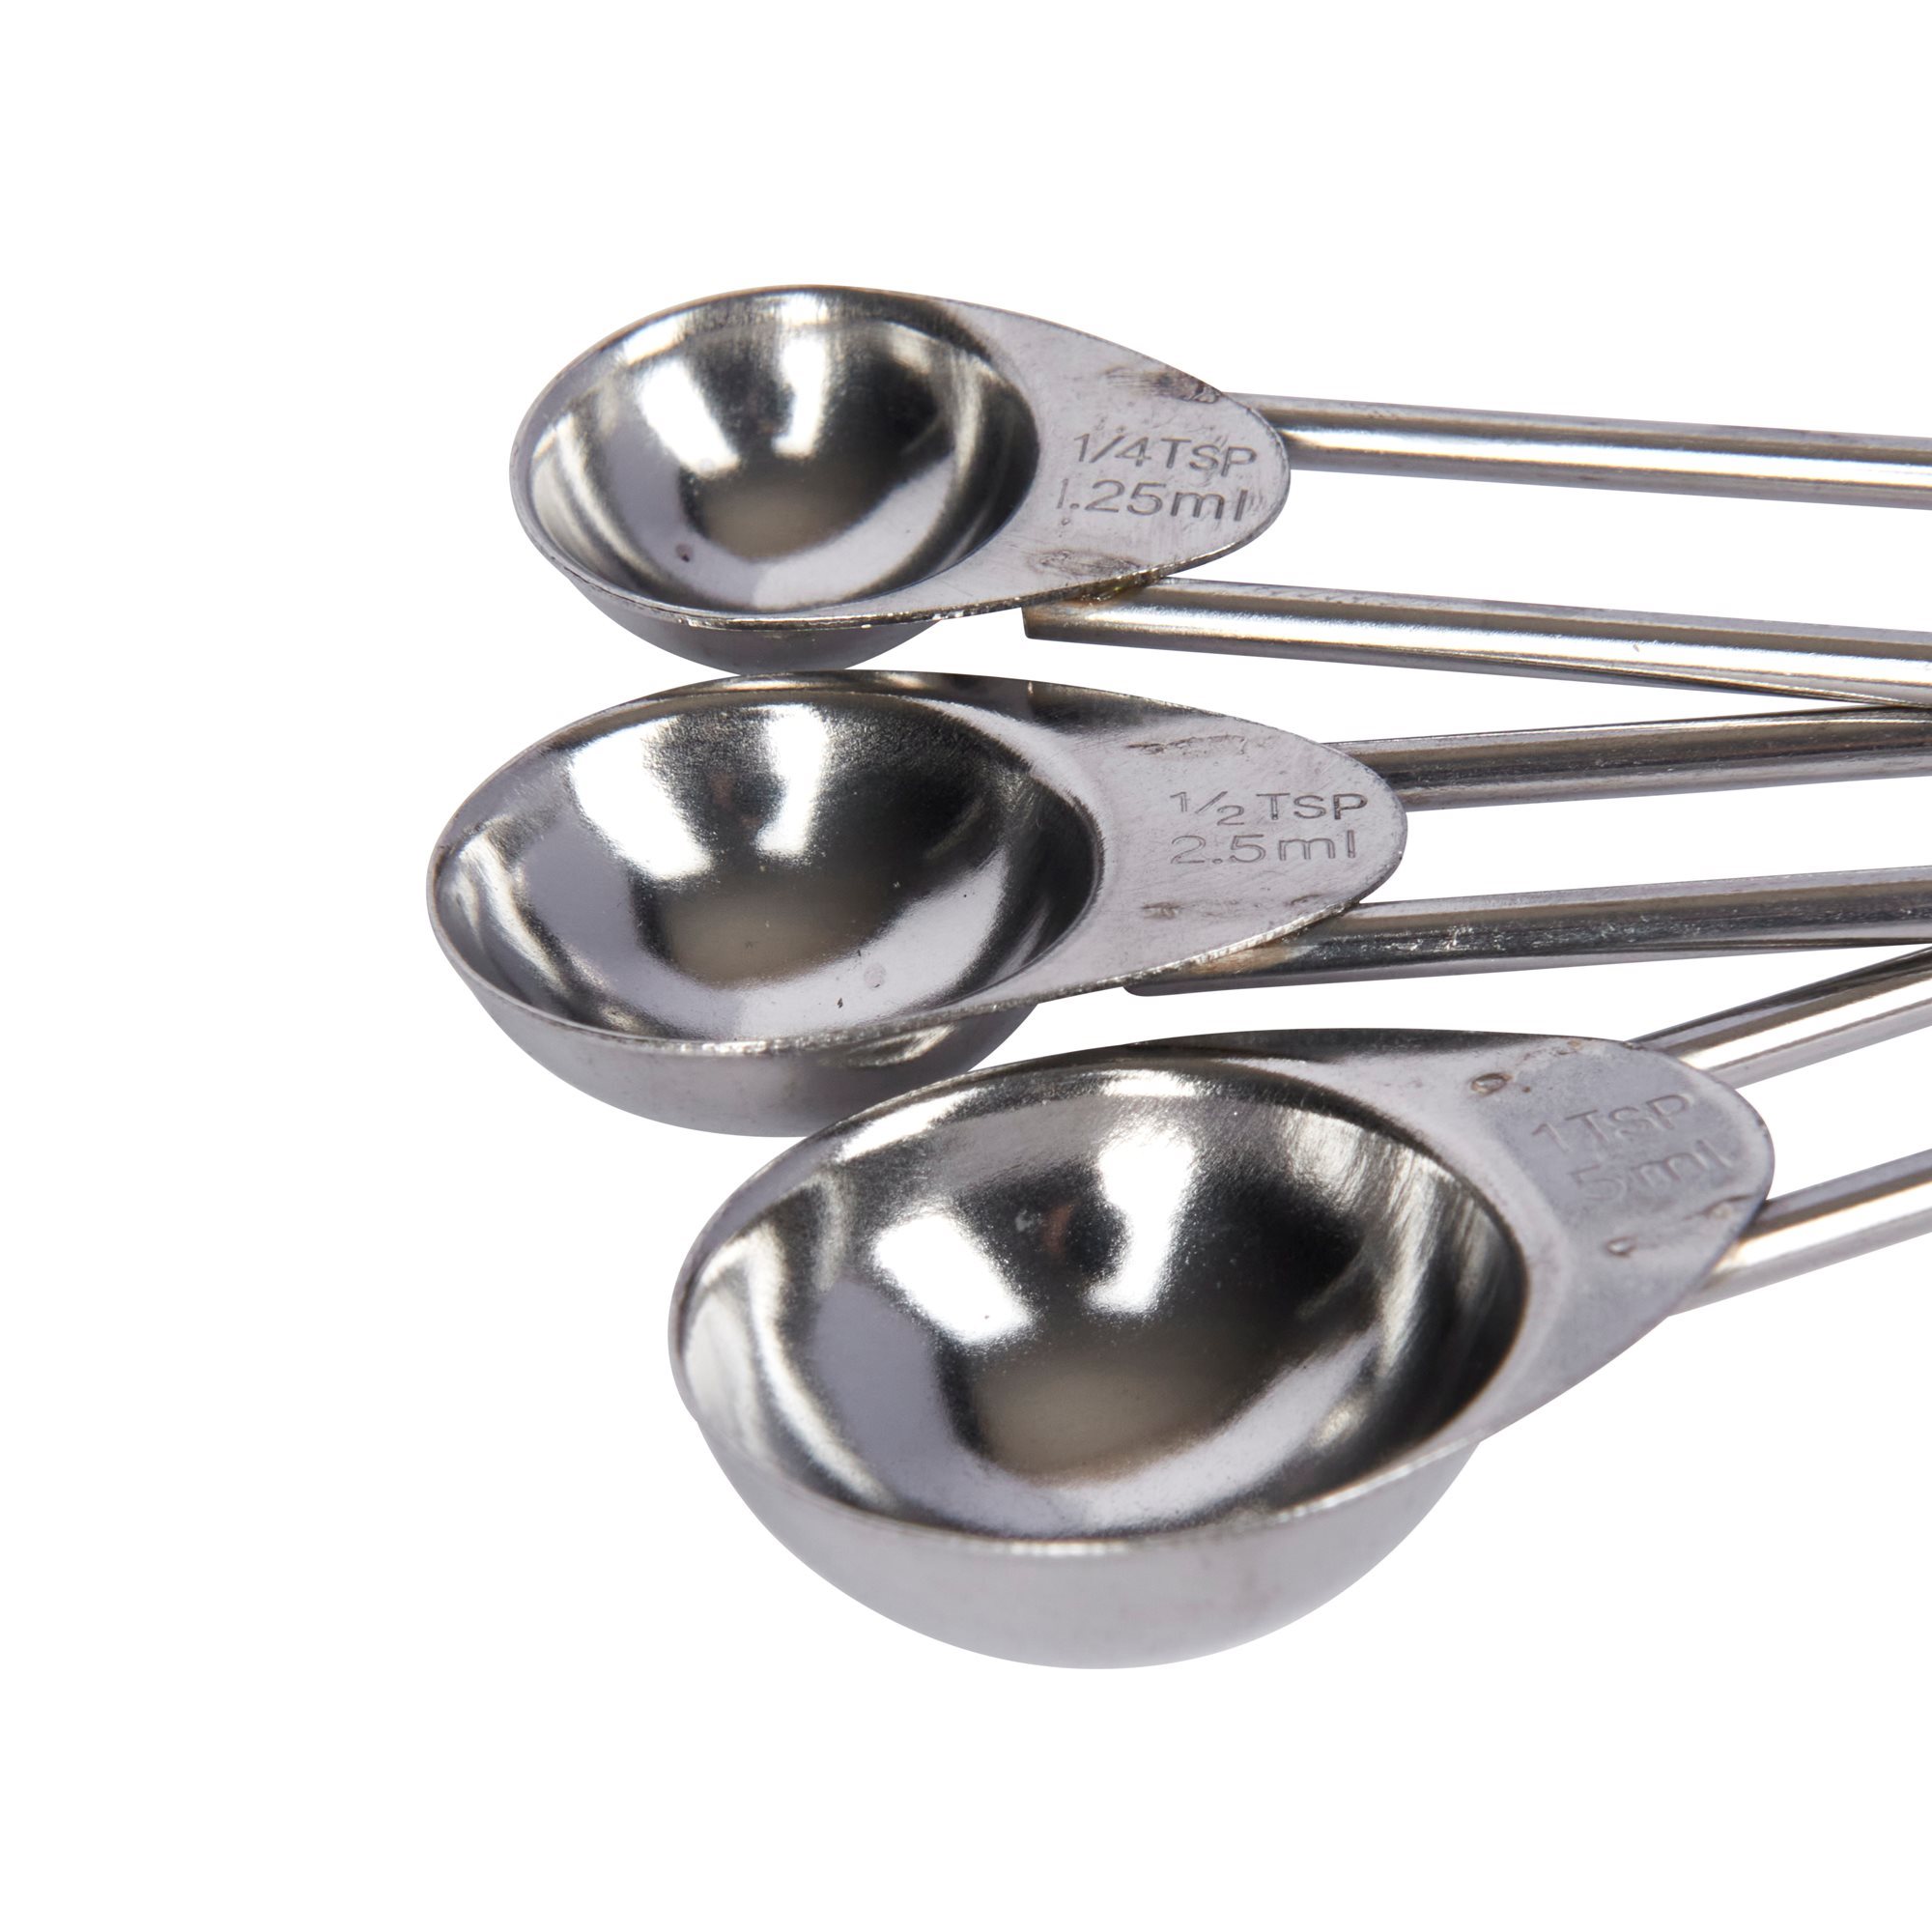 Stainless Steel Measuring Spoons Set, Small Measuring Spoon 1/8 tsp, 1/4 tsp, 3/4tsp, 1/2 tsp, 1 tsp, 1/2 Tbsp & 1 Tbsp Metal Teaspoon Measure Spoon